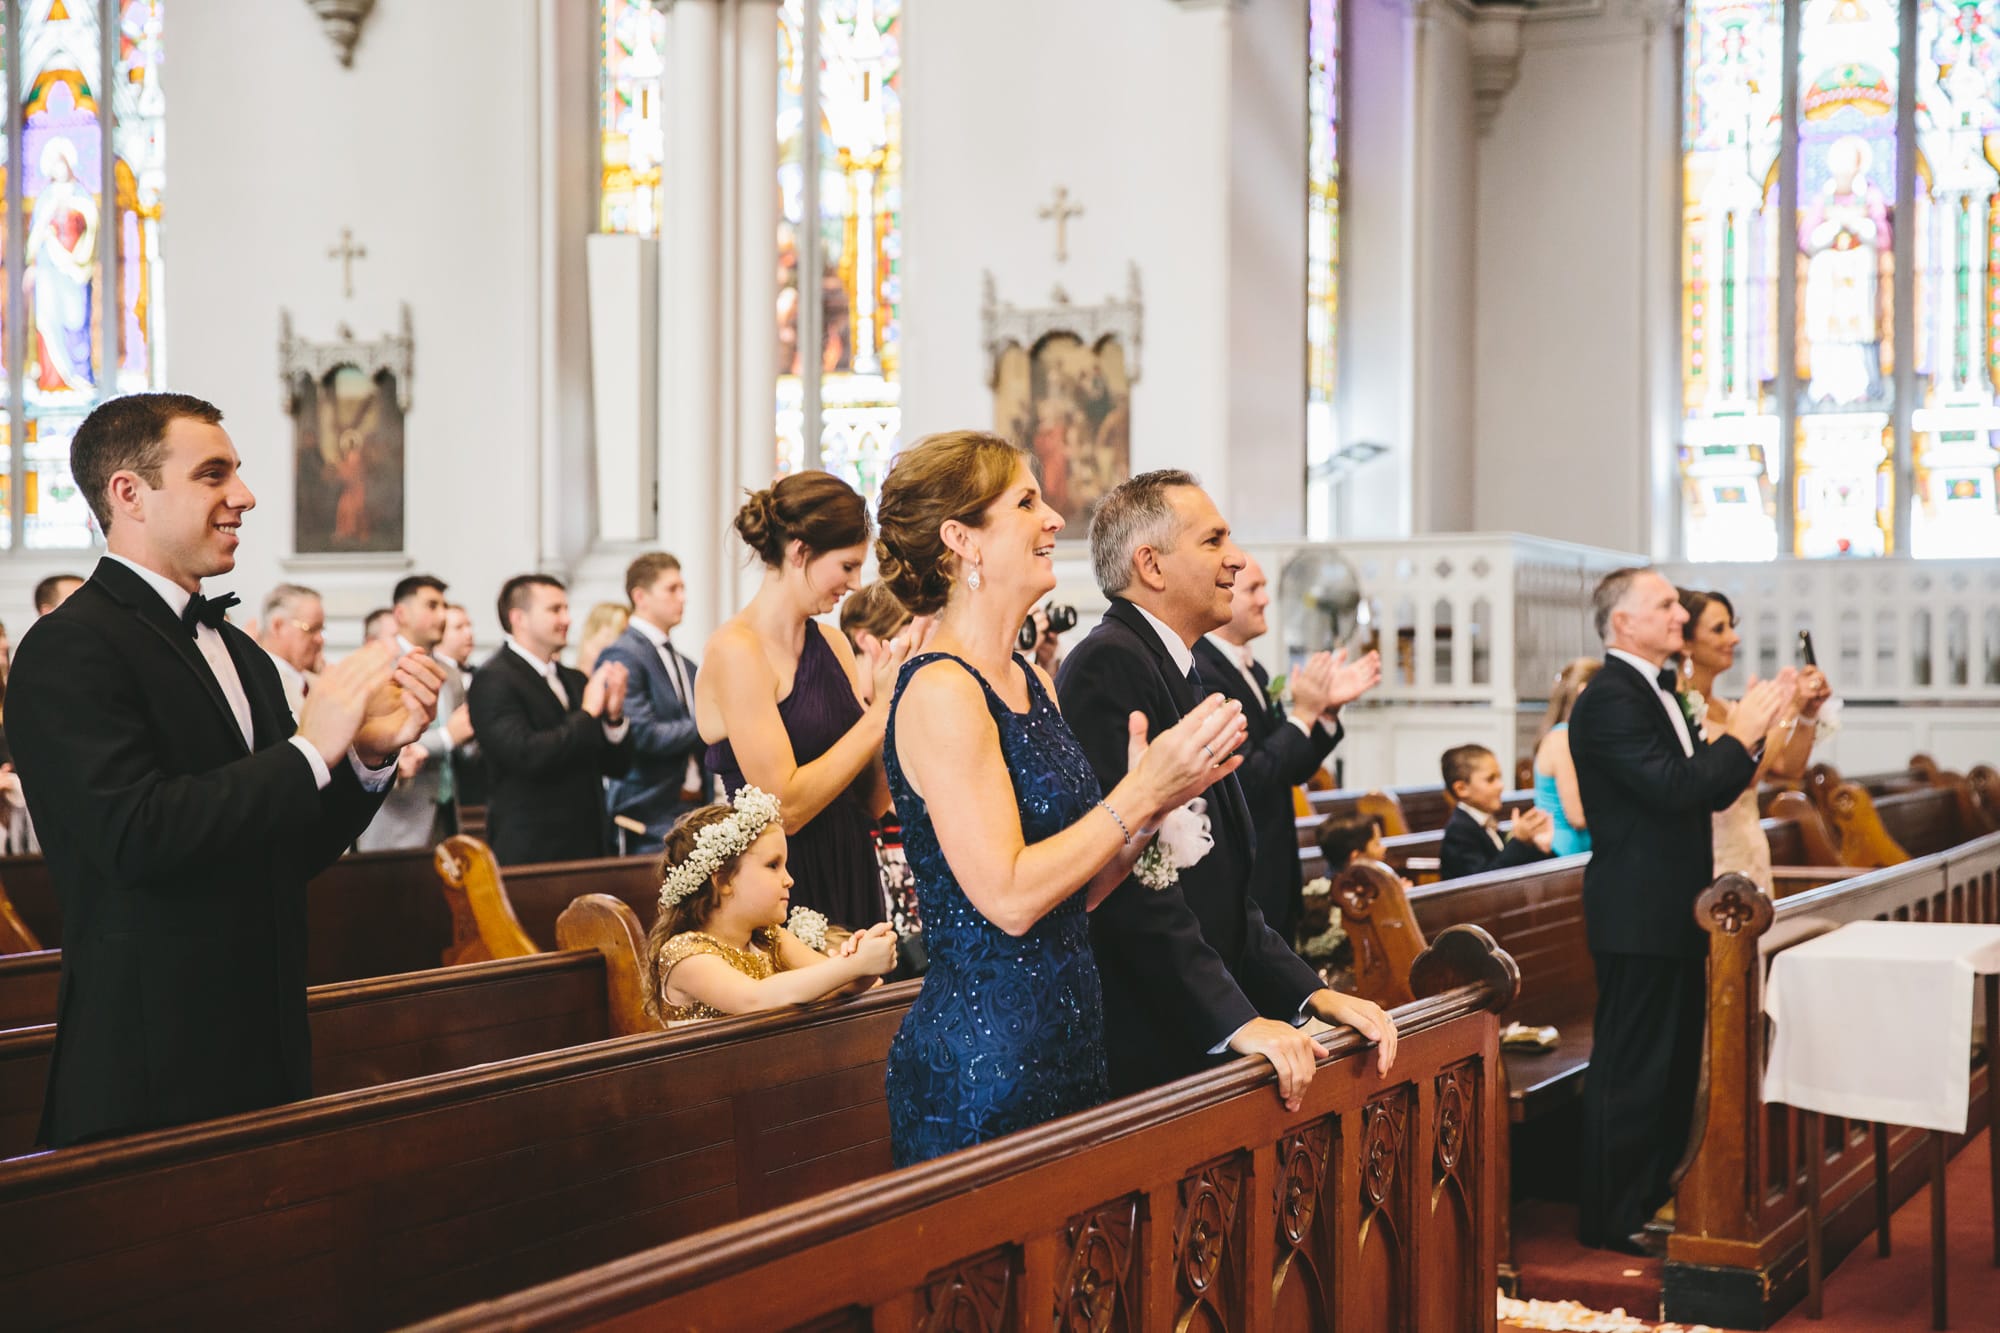 A documentary photograph of family and friends clapping during a wedding ceremony at the Cathedral of the Holy Cross